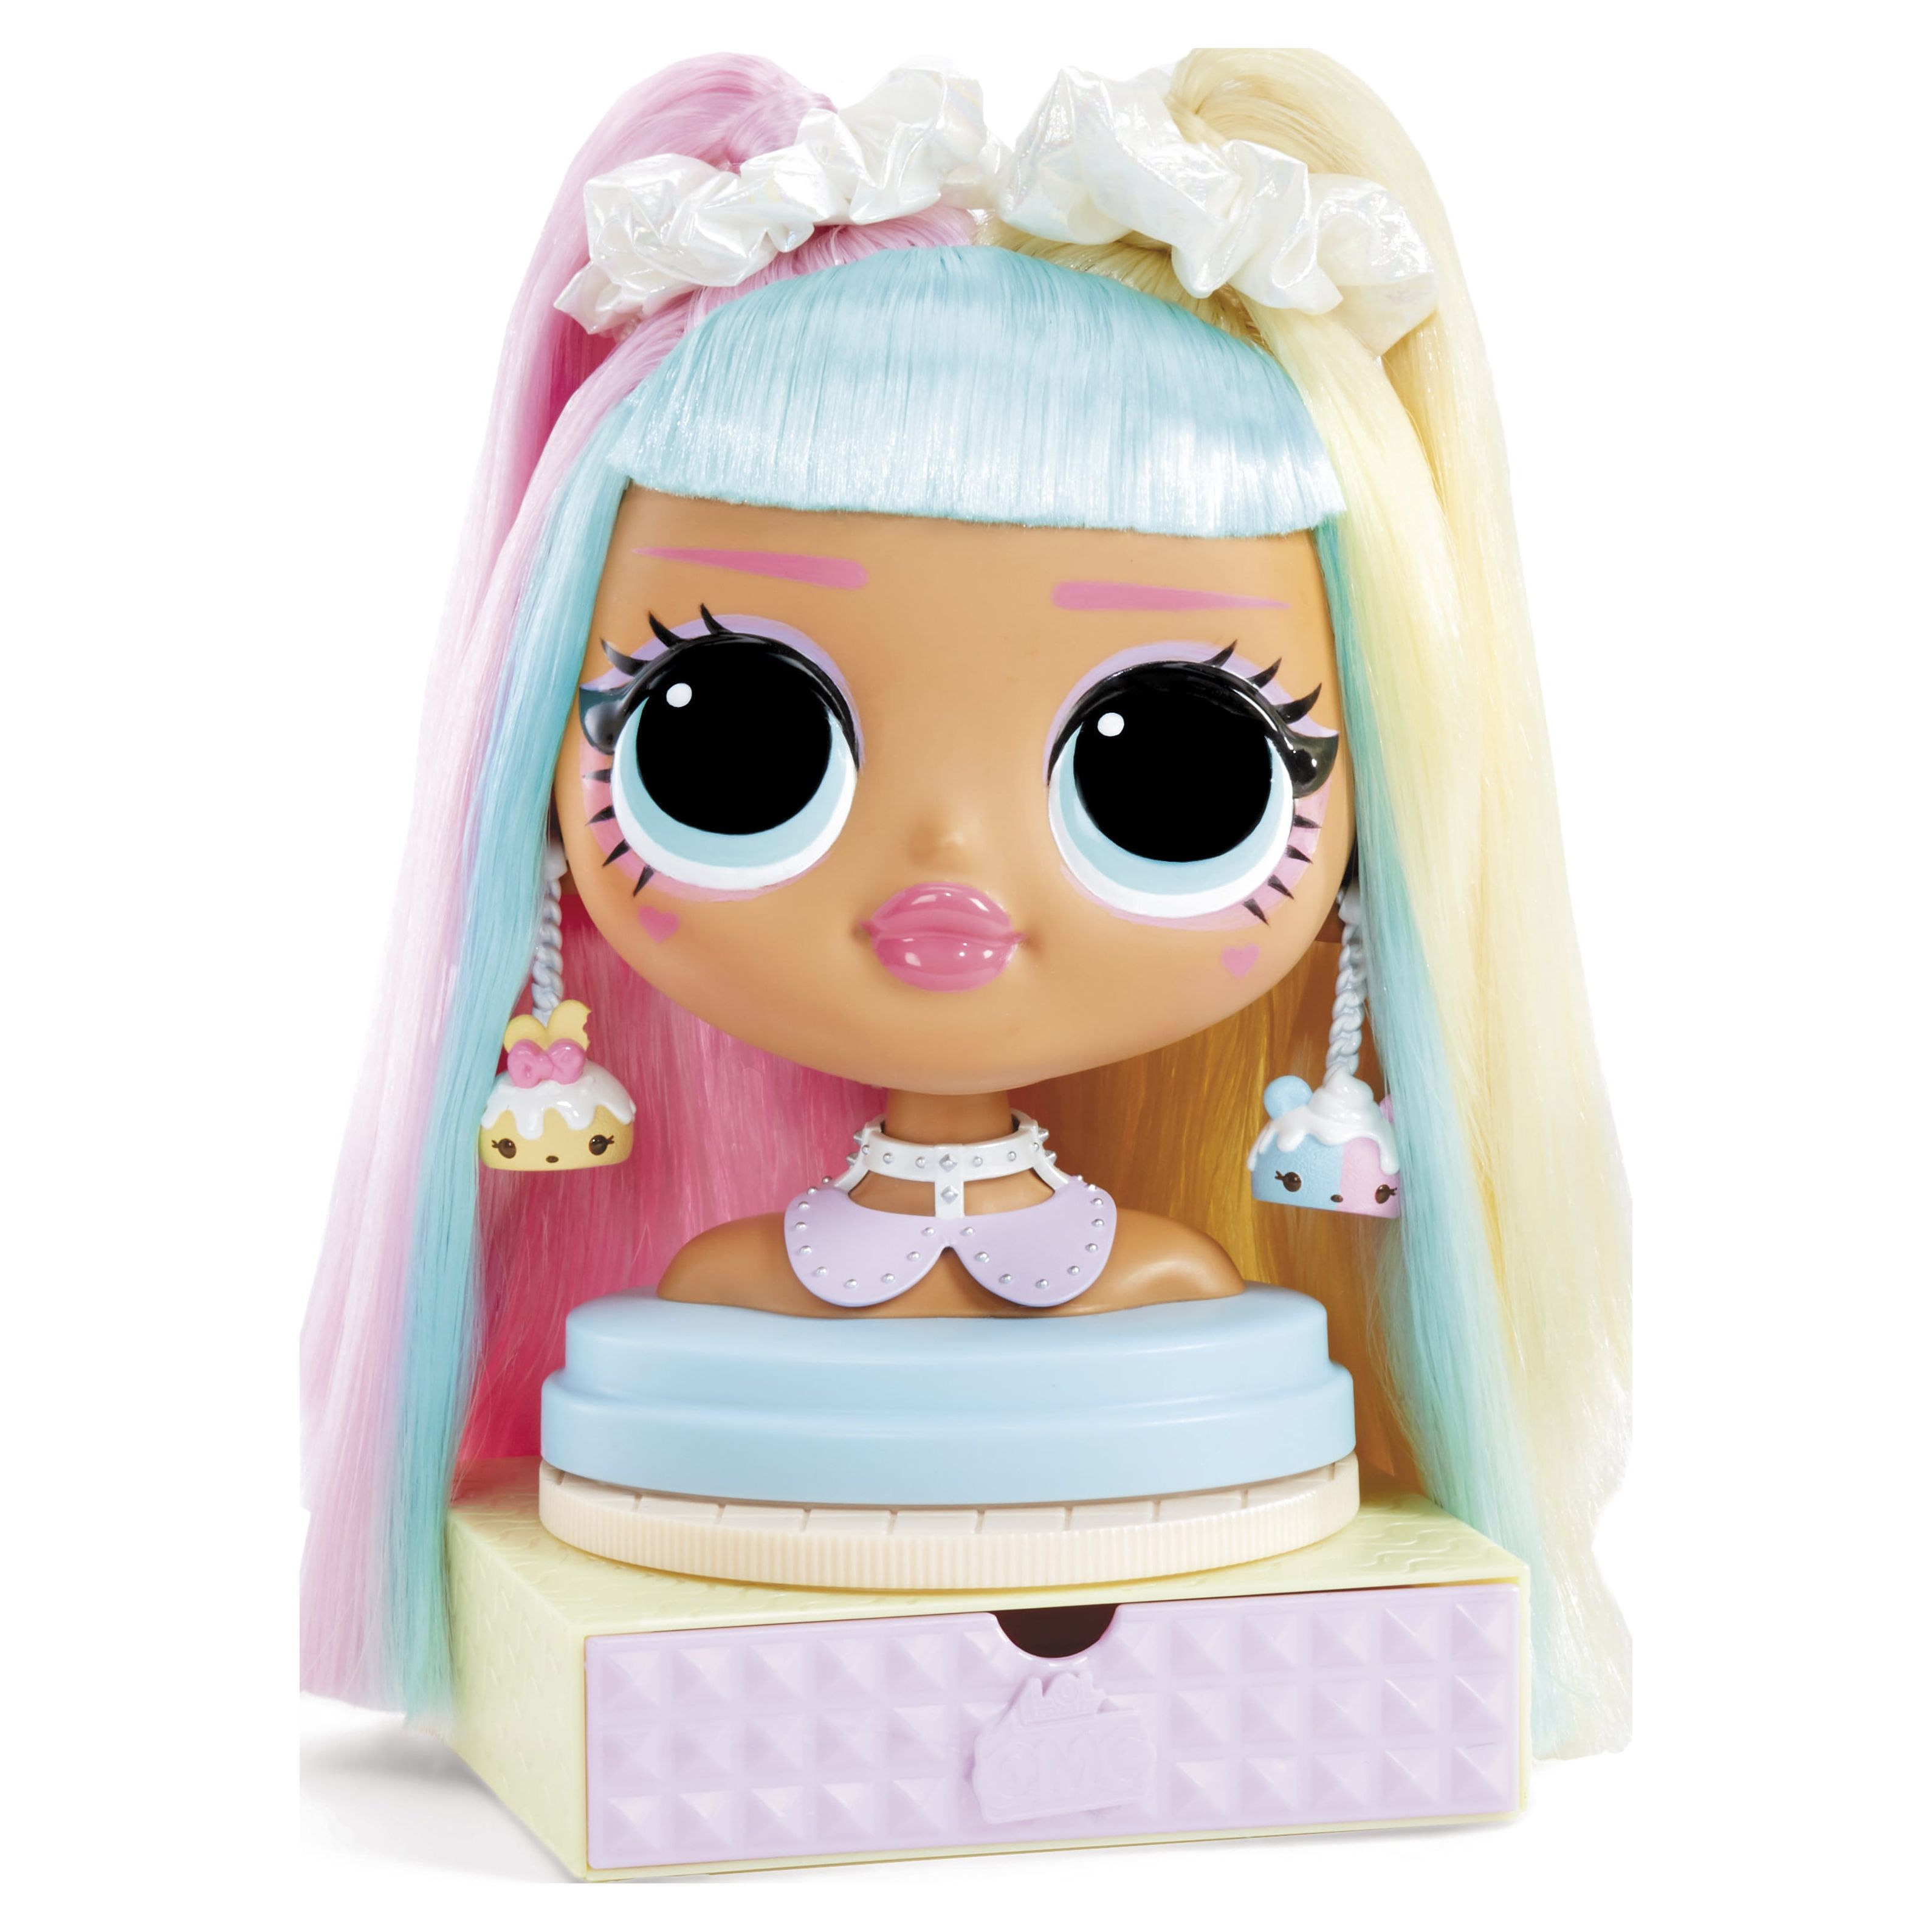 LOL Surprise Omg Styling Doll Head Candylicious With 30 Surprises Girls Hair Play Toy - image 1 of 7